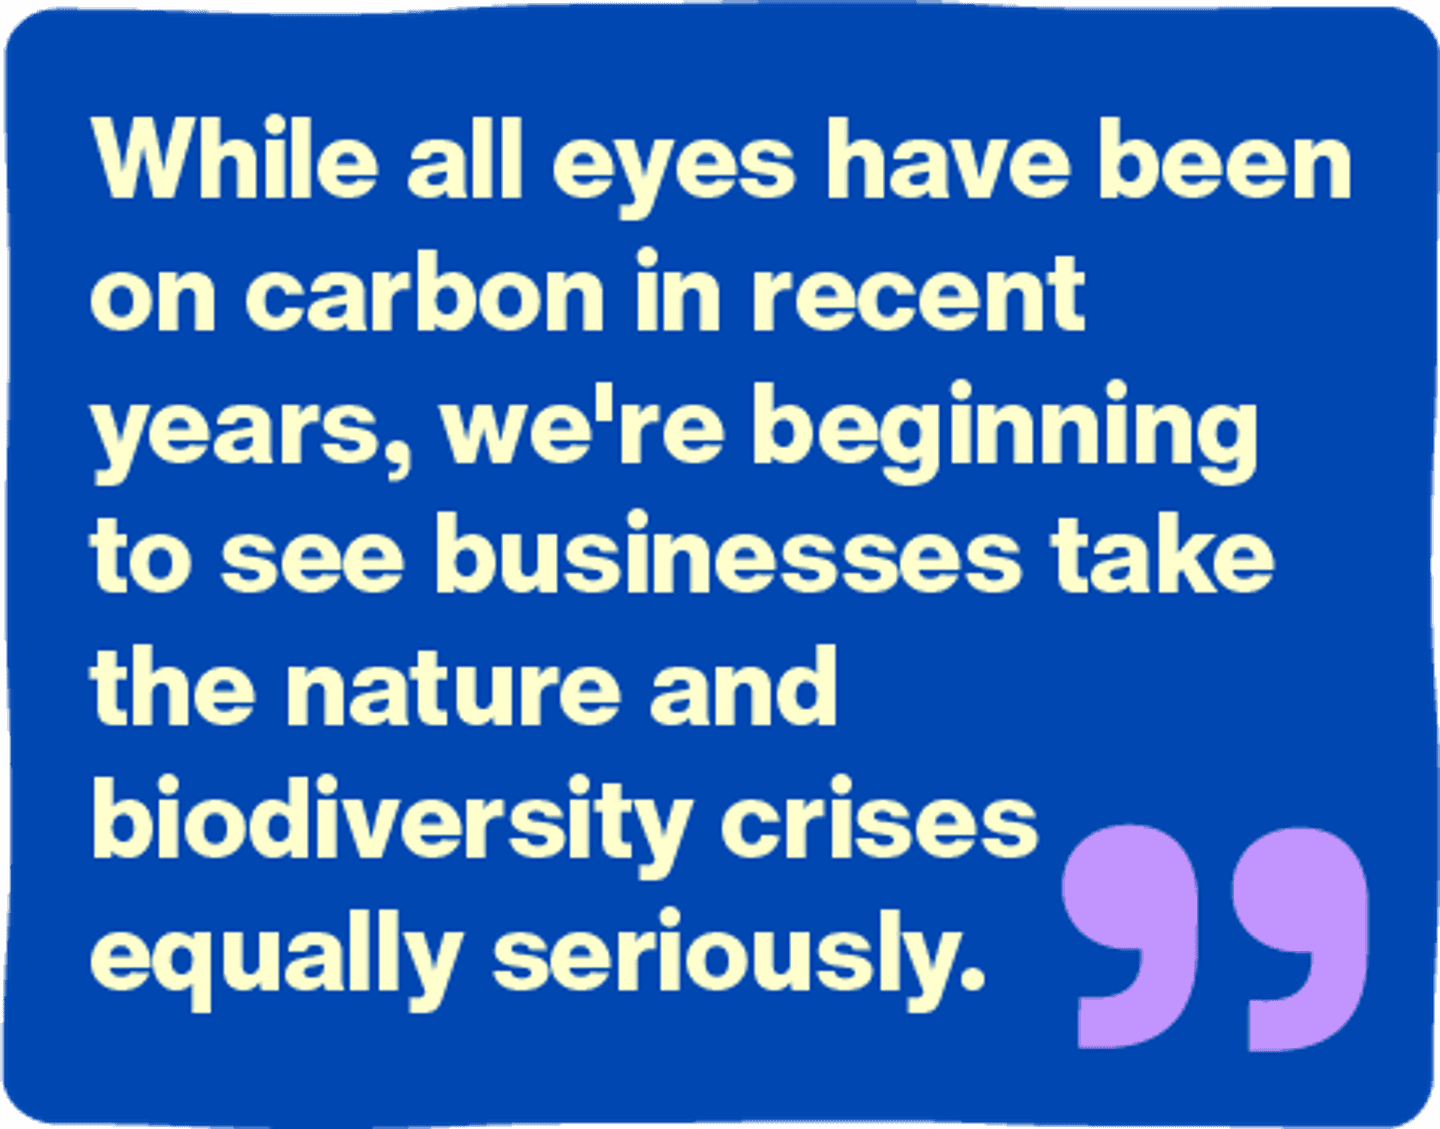 While all eyes have been on carbon in recent years, we're beginning to see businesses take the nature and biodiversity crises equally seriously.